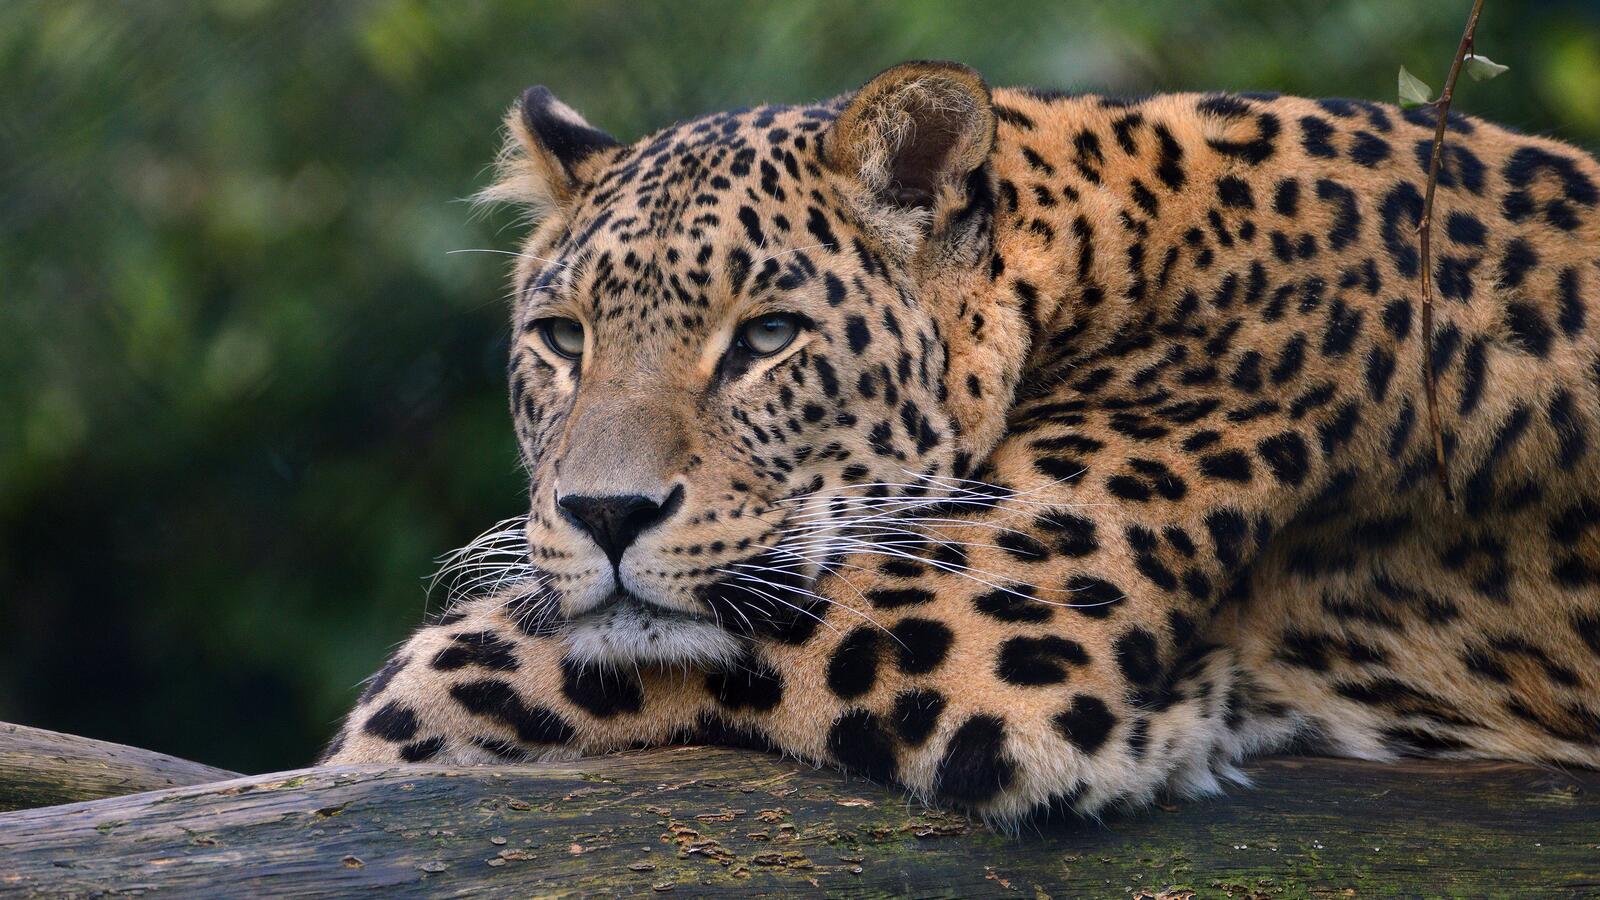 Free photo The leopard is resting